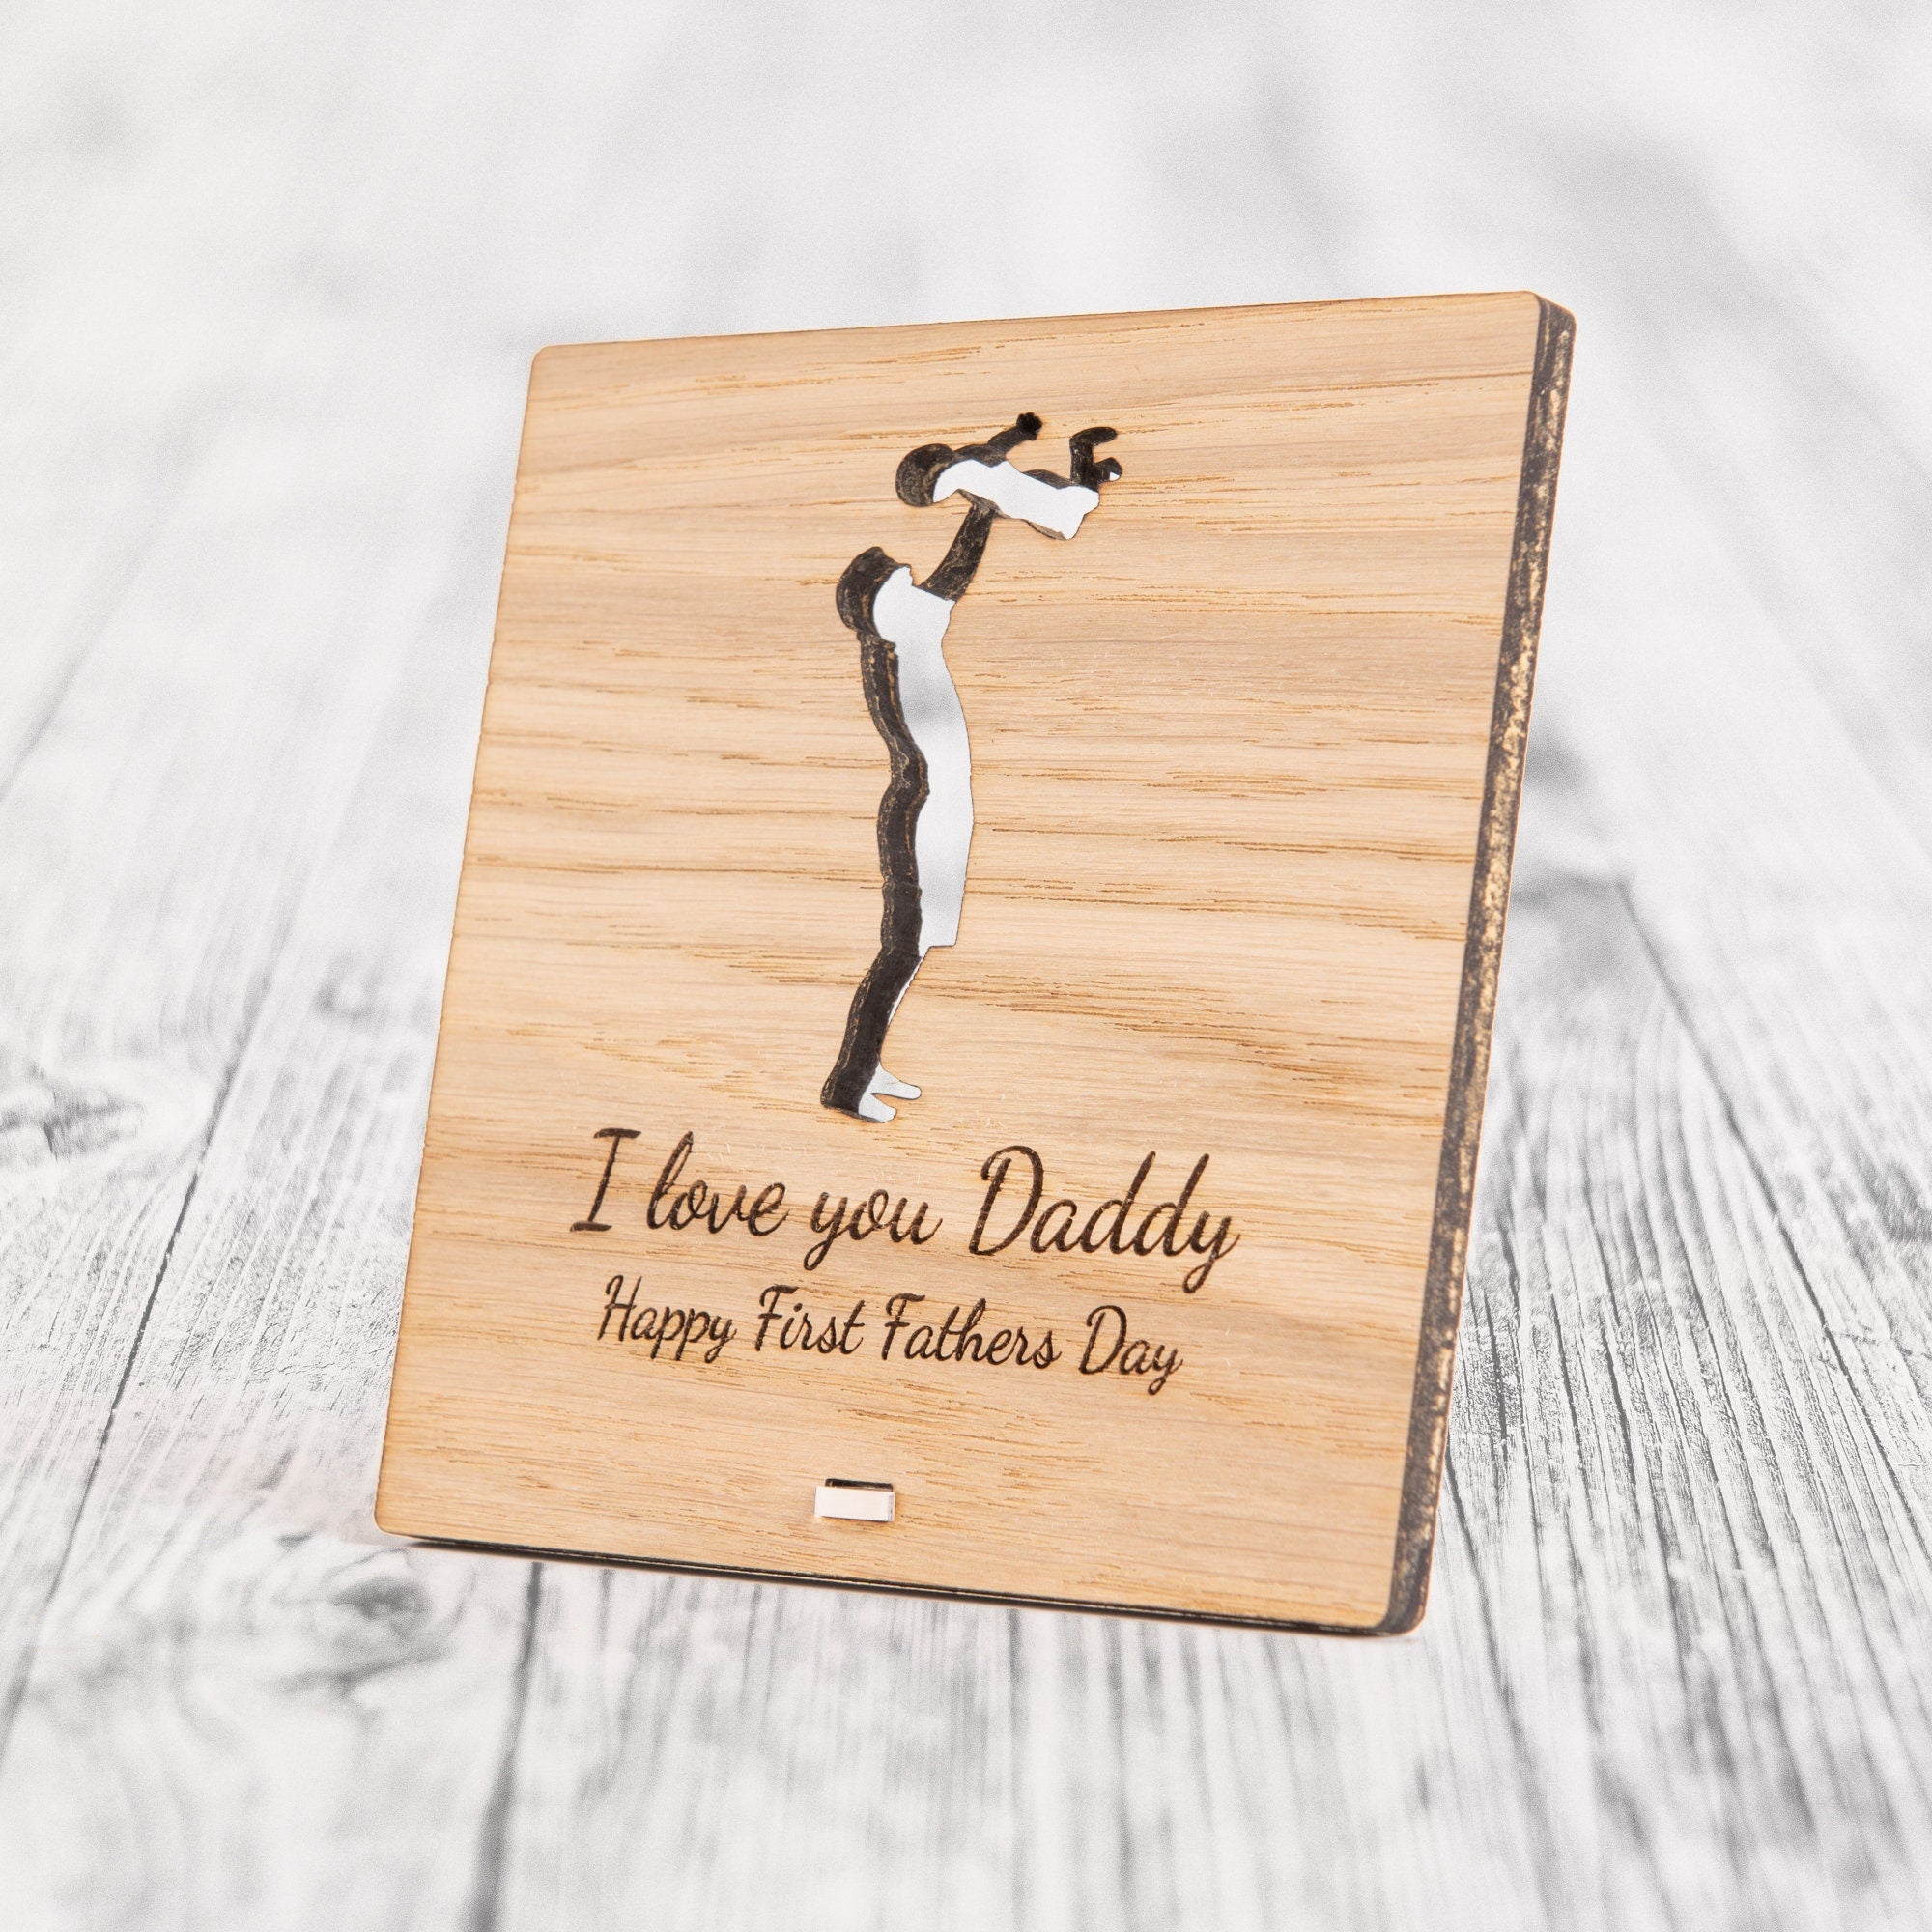 Memorable Gifts for Your Husband on His First Father's Day